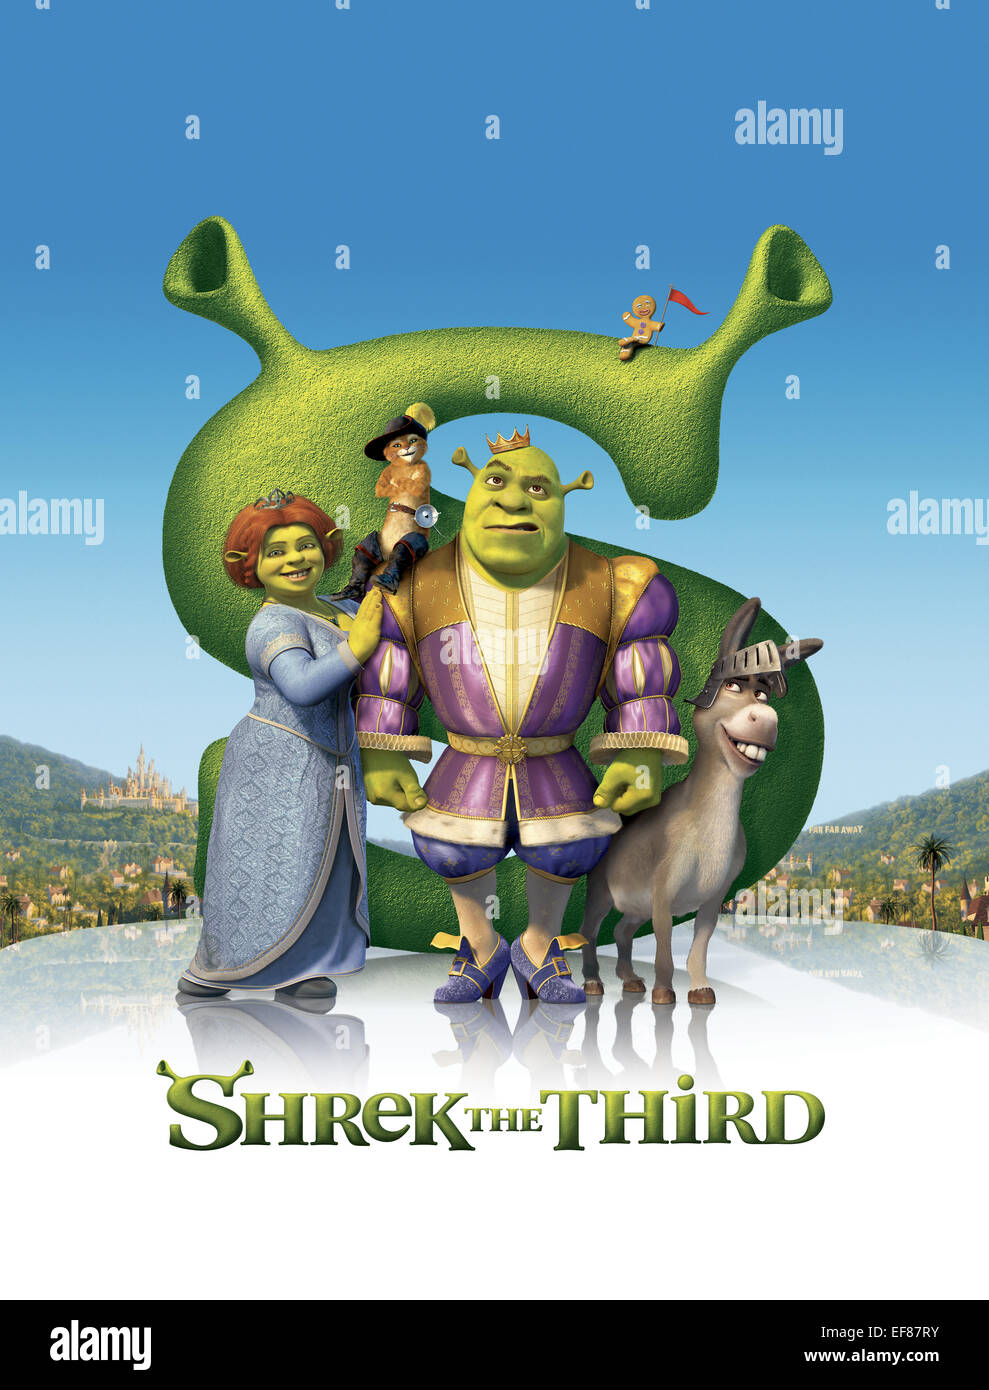 Page 2 - Shrek Donkey High Resolution Stock Photography and Images - Alamy